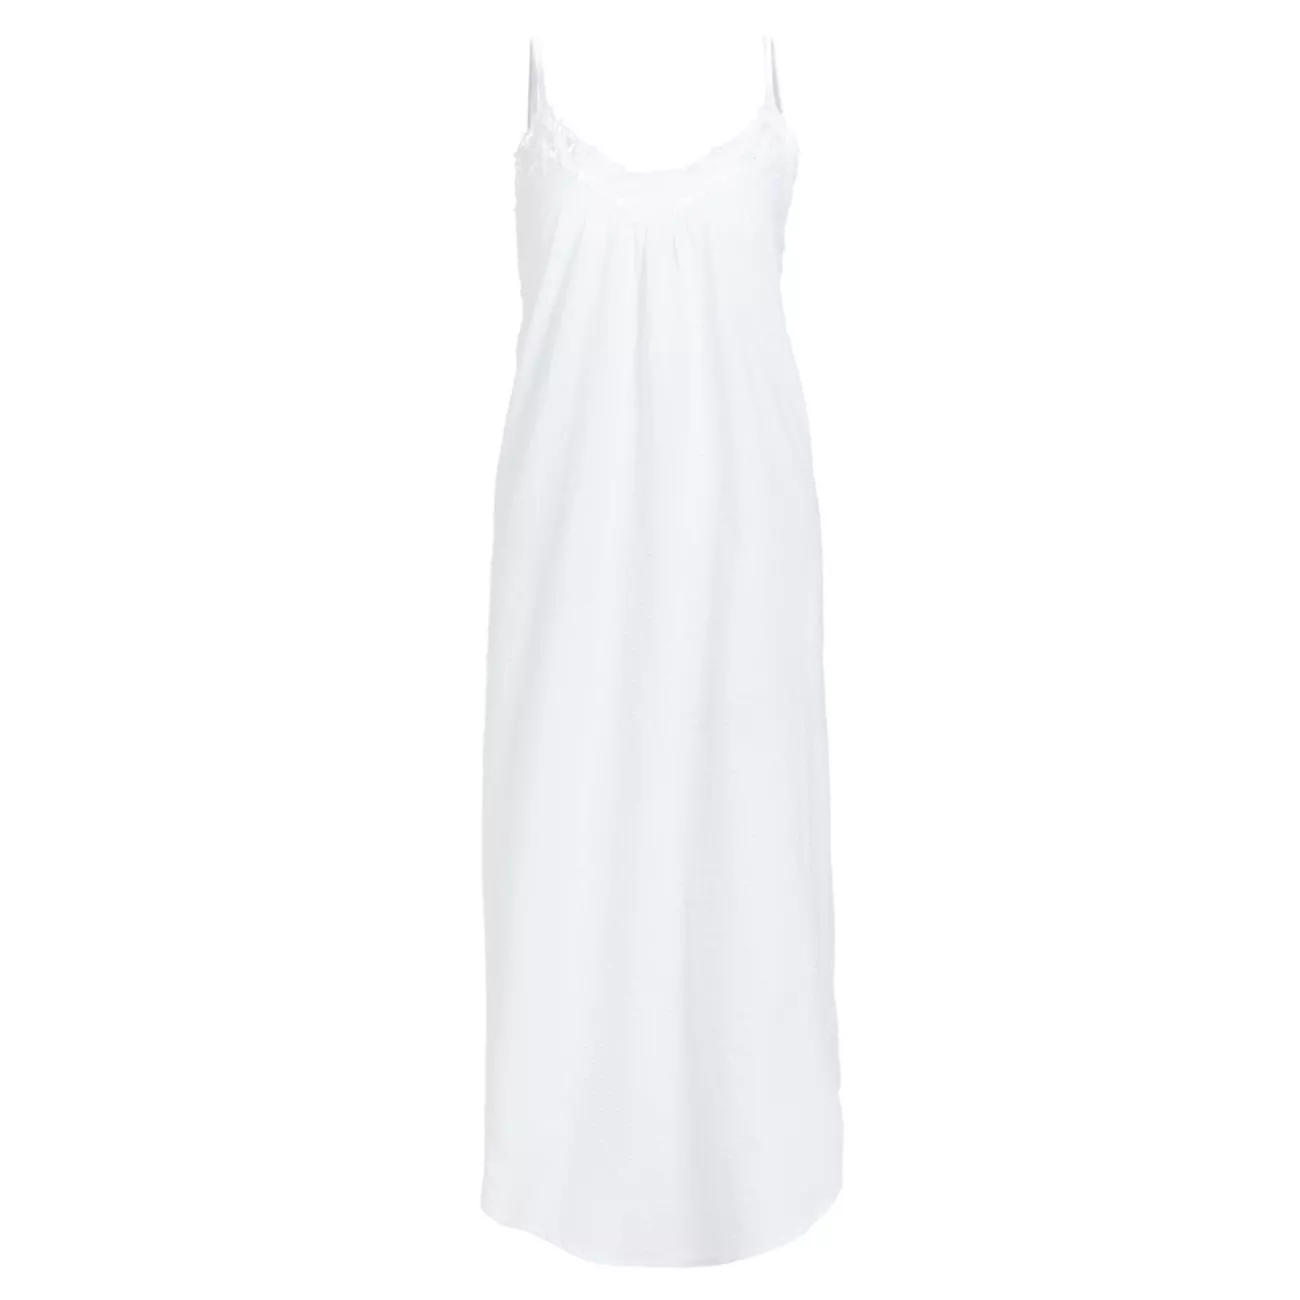 Lace-Trimmed Swiss Dot Cotton Nightgown PAPINELLE